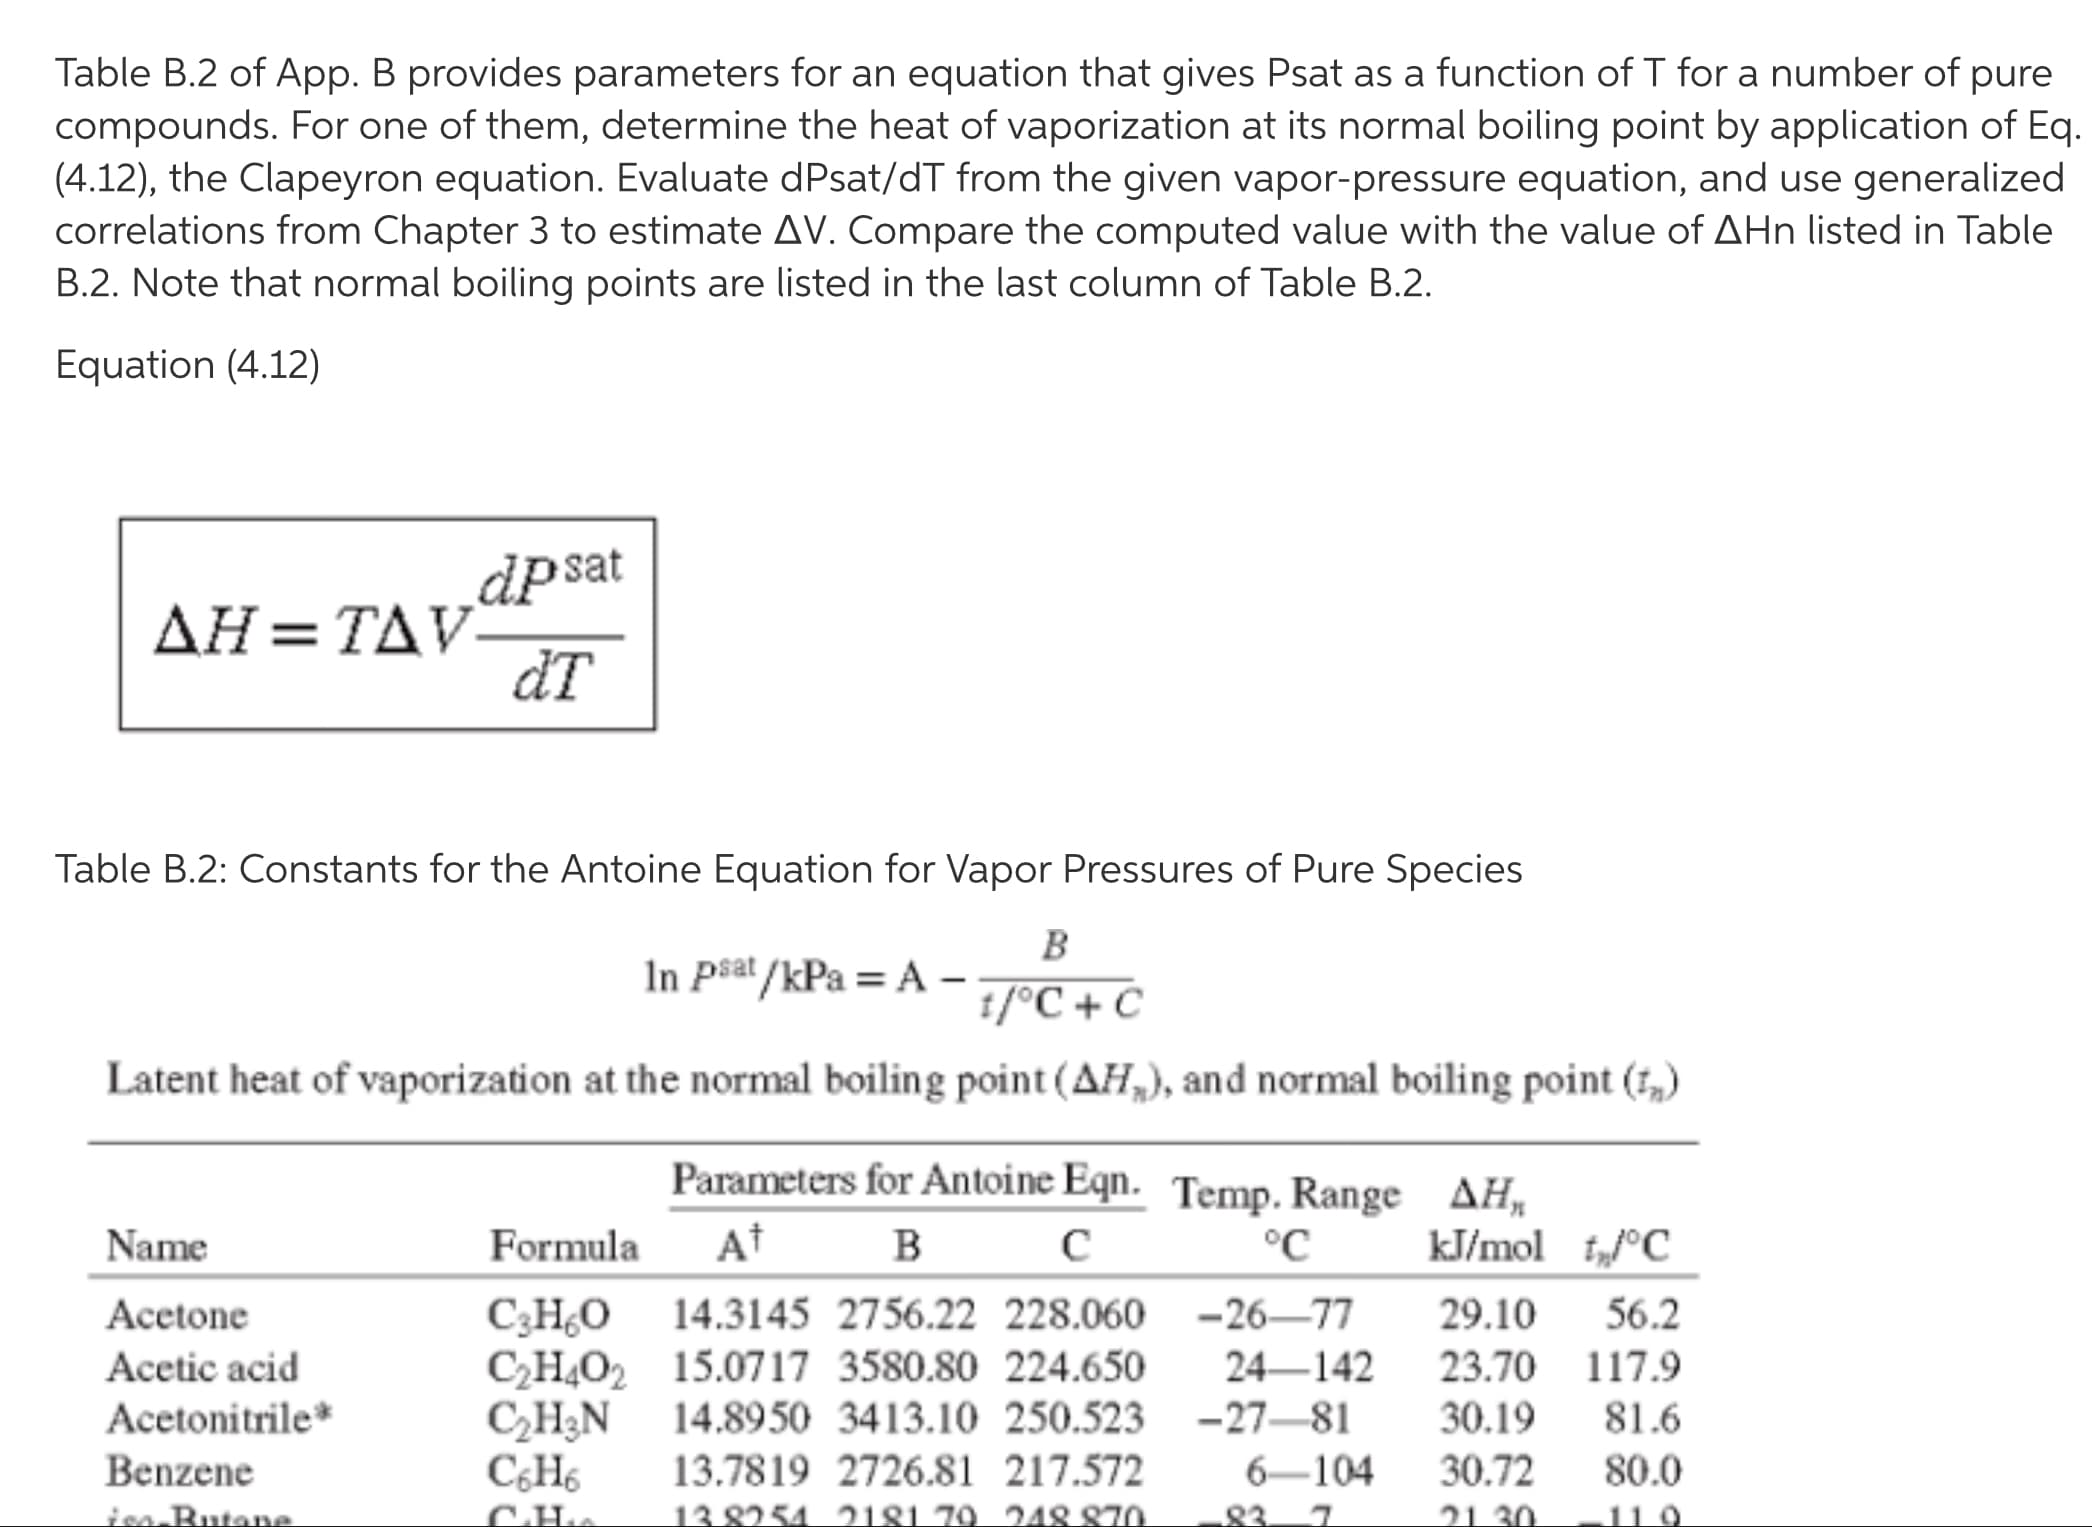 Table B.2 of App. B provides parameters for an equation that gives Psat as a function of T for a number of pure
compounds. For one of them, determine the heat of vaporization at its normal boiling point by application of Eq.
(4.12), the Clapeyron equation. Evaluate dPsat/dT from the given vapor-pressure equation, and use generalized
correlations from Chapter 3 to estimate AV. Compare the computed value with the value of AHn listed in Table
B.2. Note that normal boiling points are listed in the last column of Table B.2.
Equation (4.12)
dpsat
ДН - ТАУ-
đT
Table B.2: Constants for the Antoine Equation for Vapor Pressures of Pure Species
B
In Psat /kPa = A –-
1/°C + C
Latent heat of vaporization at the normal boiling point (AH,), and normal boiling point (1,)
Parameters for Antoine Eqn. Temp. Range AH,
Name
Formula
At
°C
kJ/mol t„°C
C3H¿O 14.3145 2756.22 228.060 -26–77
C2H4O2 15.0717 3580.80 224.650
CH3N 14.8950 3413.10 250.523 -27–81
13.7819 2726.81 217.572
13 8254 2181 .79. 248 870
Acetone
29.10
56.2
Acetic acid
24–142
23.70 117.9
Acetonitrile*
30.19
81.6
Benzene
C¿H6
6-104
30.72
80.0
ion Butane
21 30
